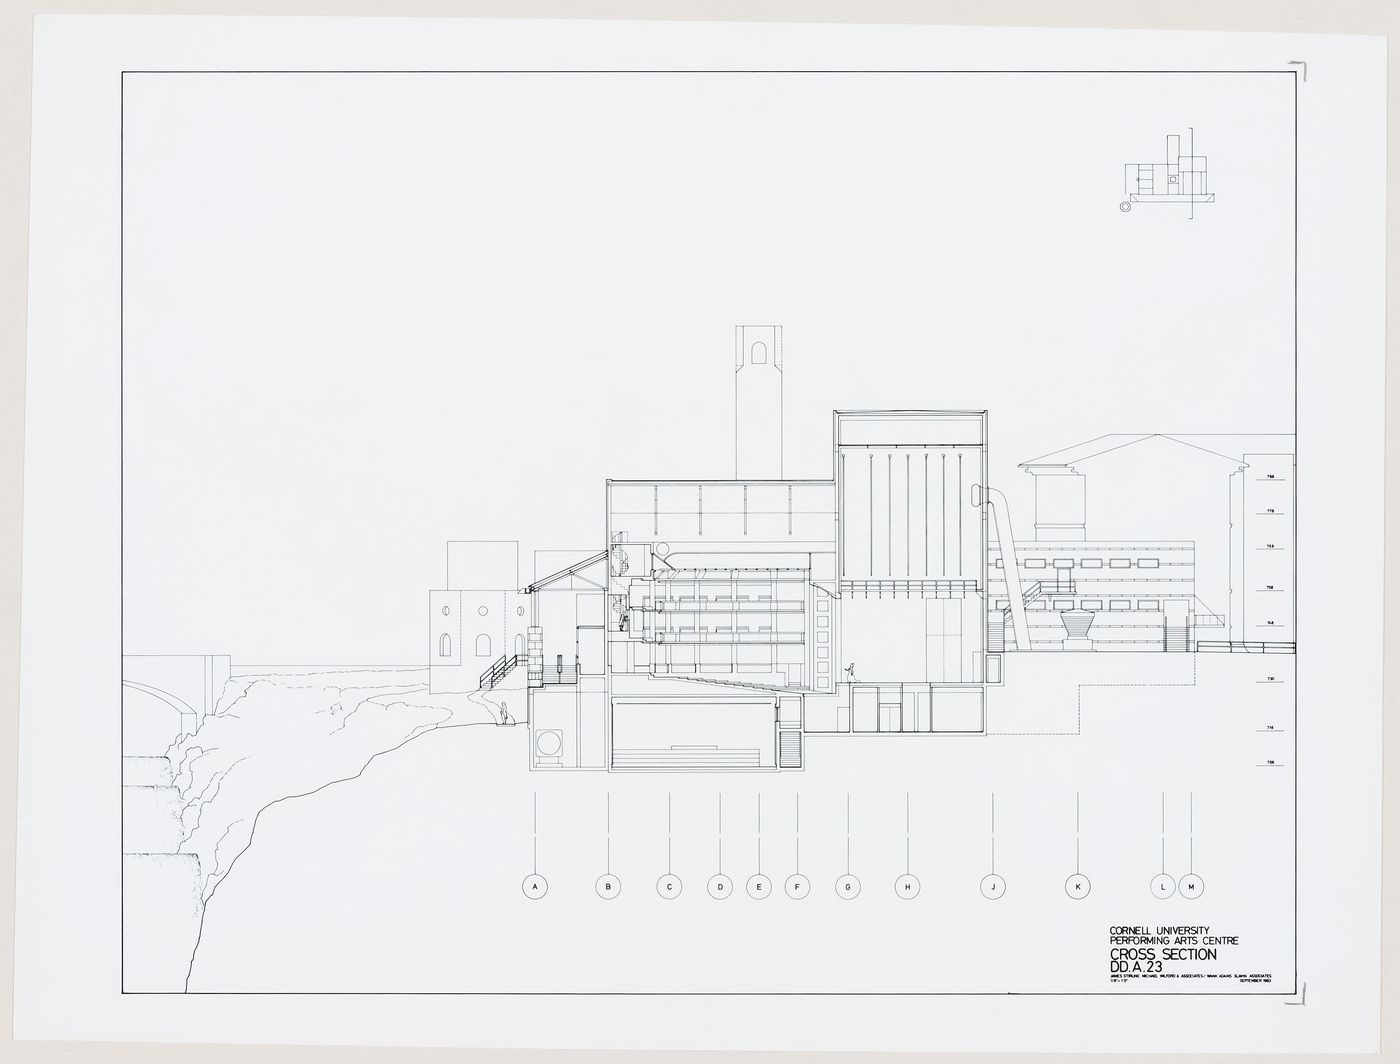 Center for Theatre Arts, Cornell University, Ithaca, New York: cross section